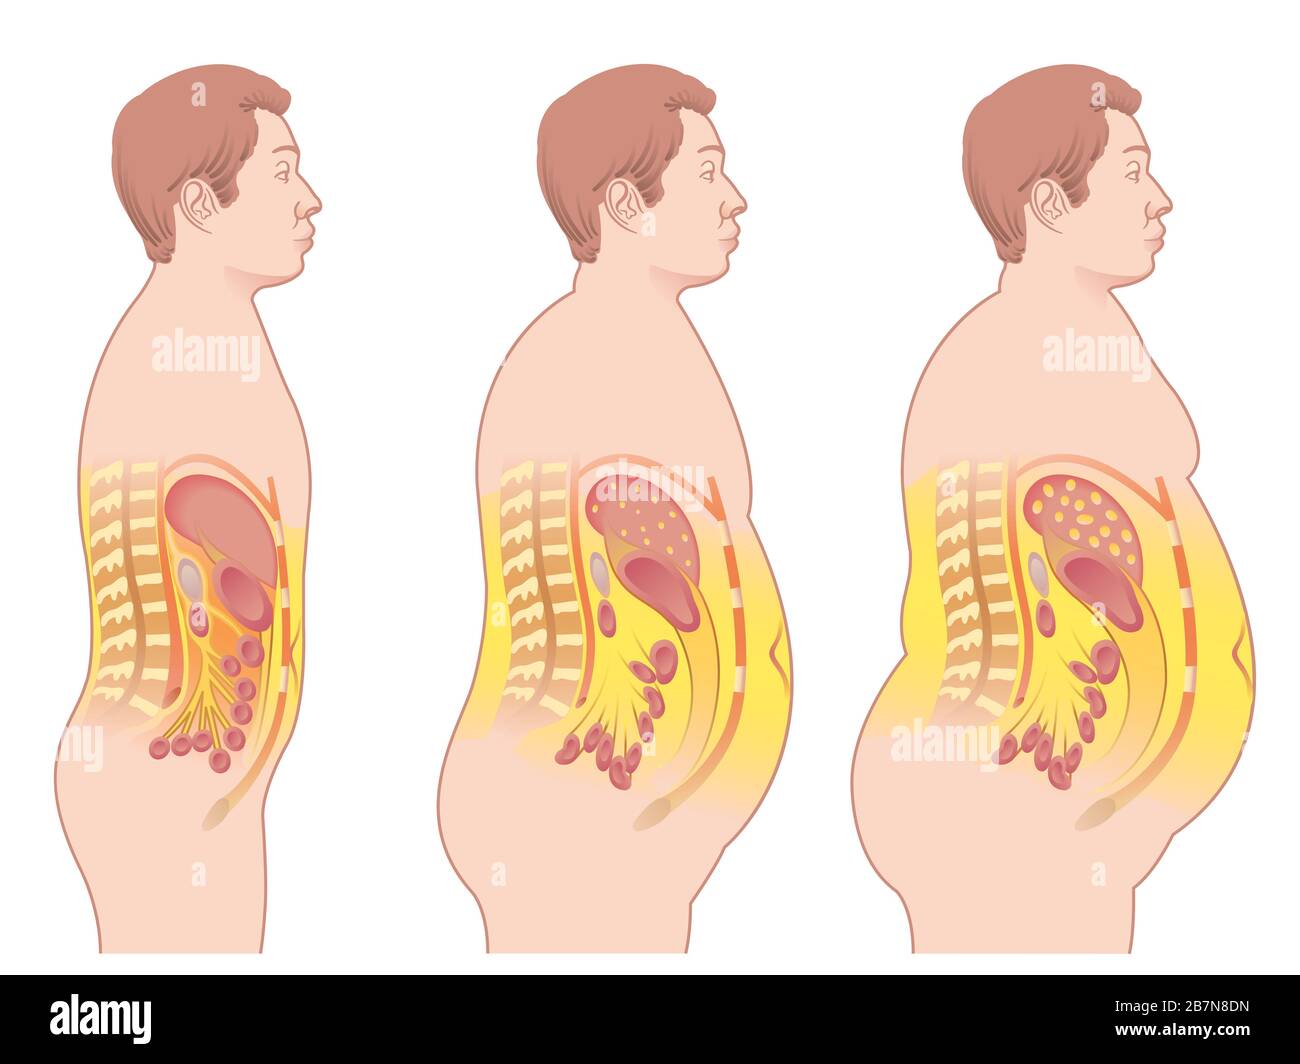 Medical illustration of the consequences of obesity. Stock Photo